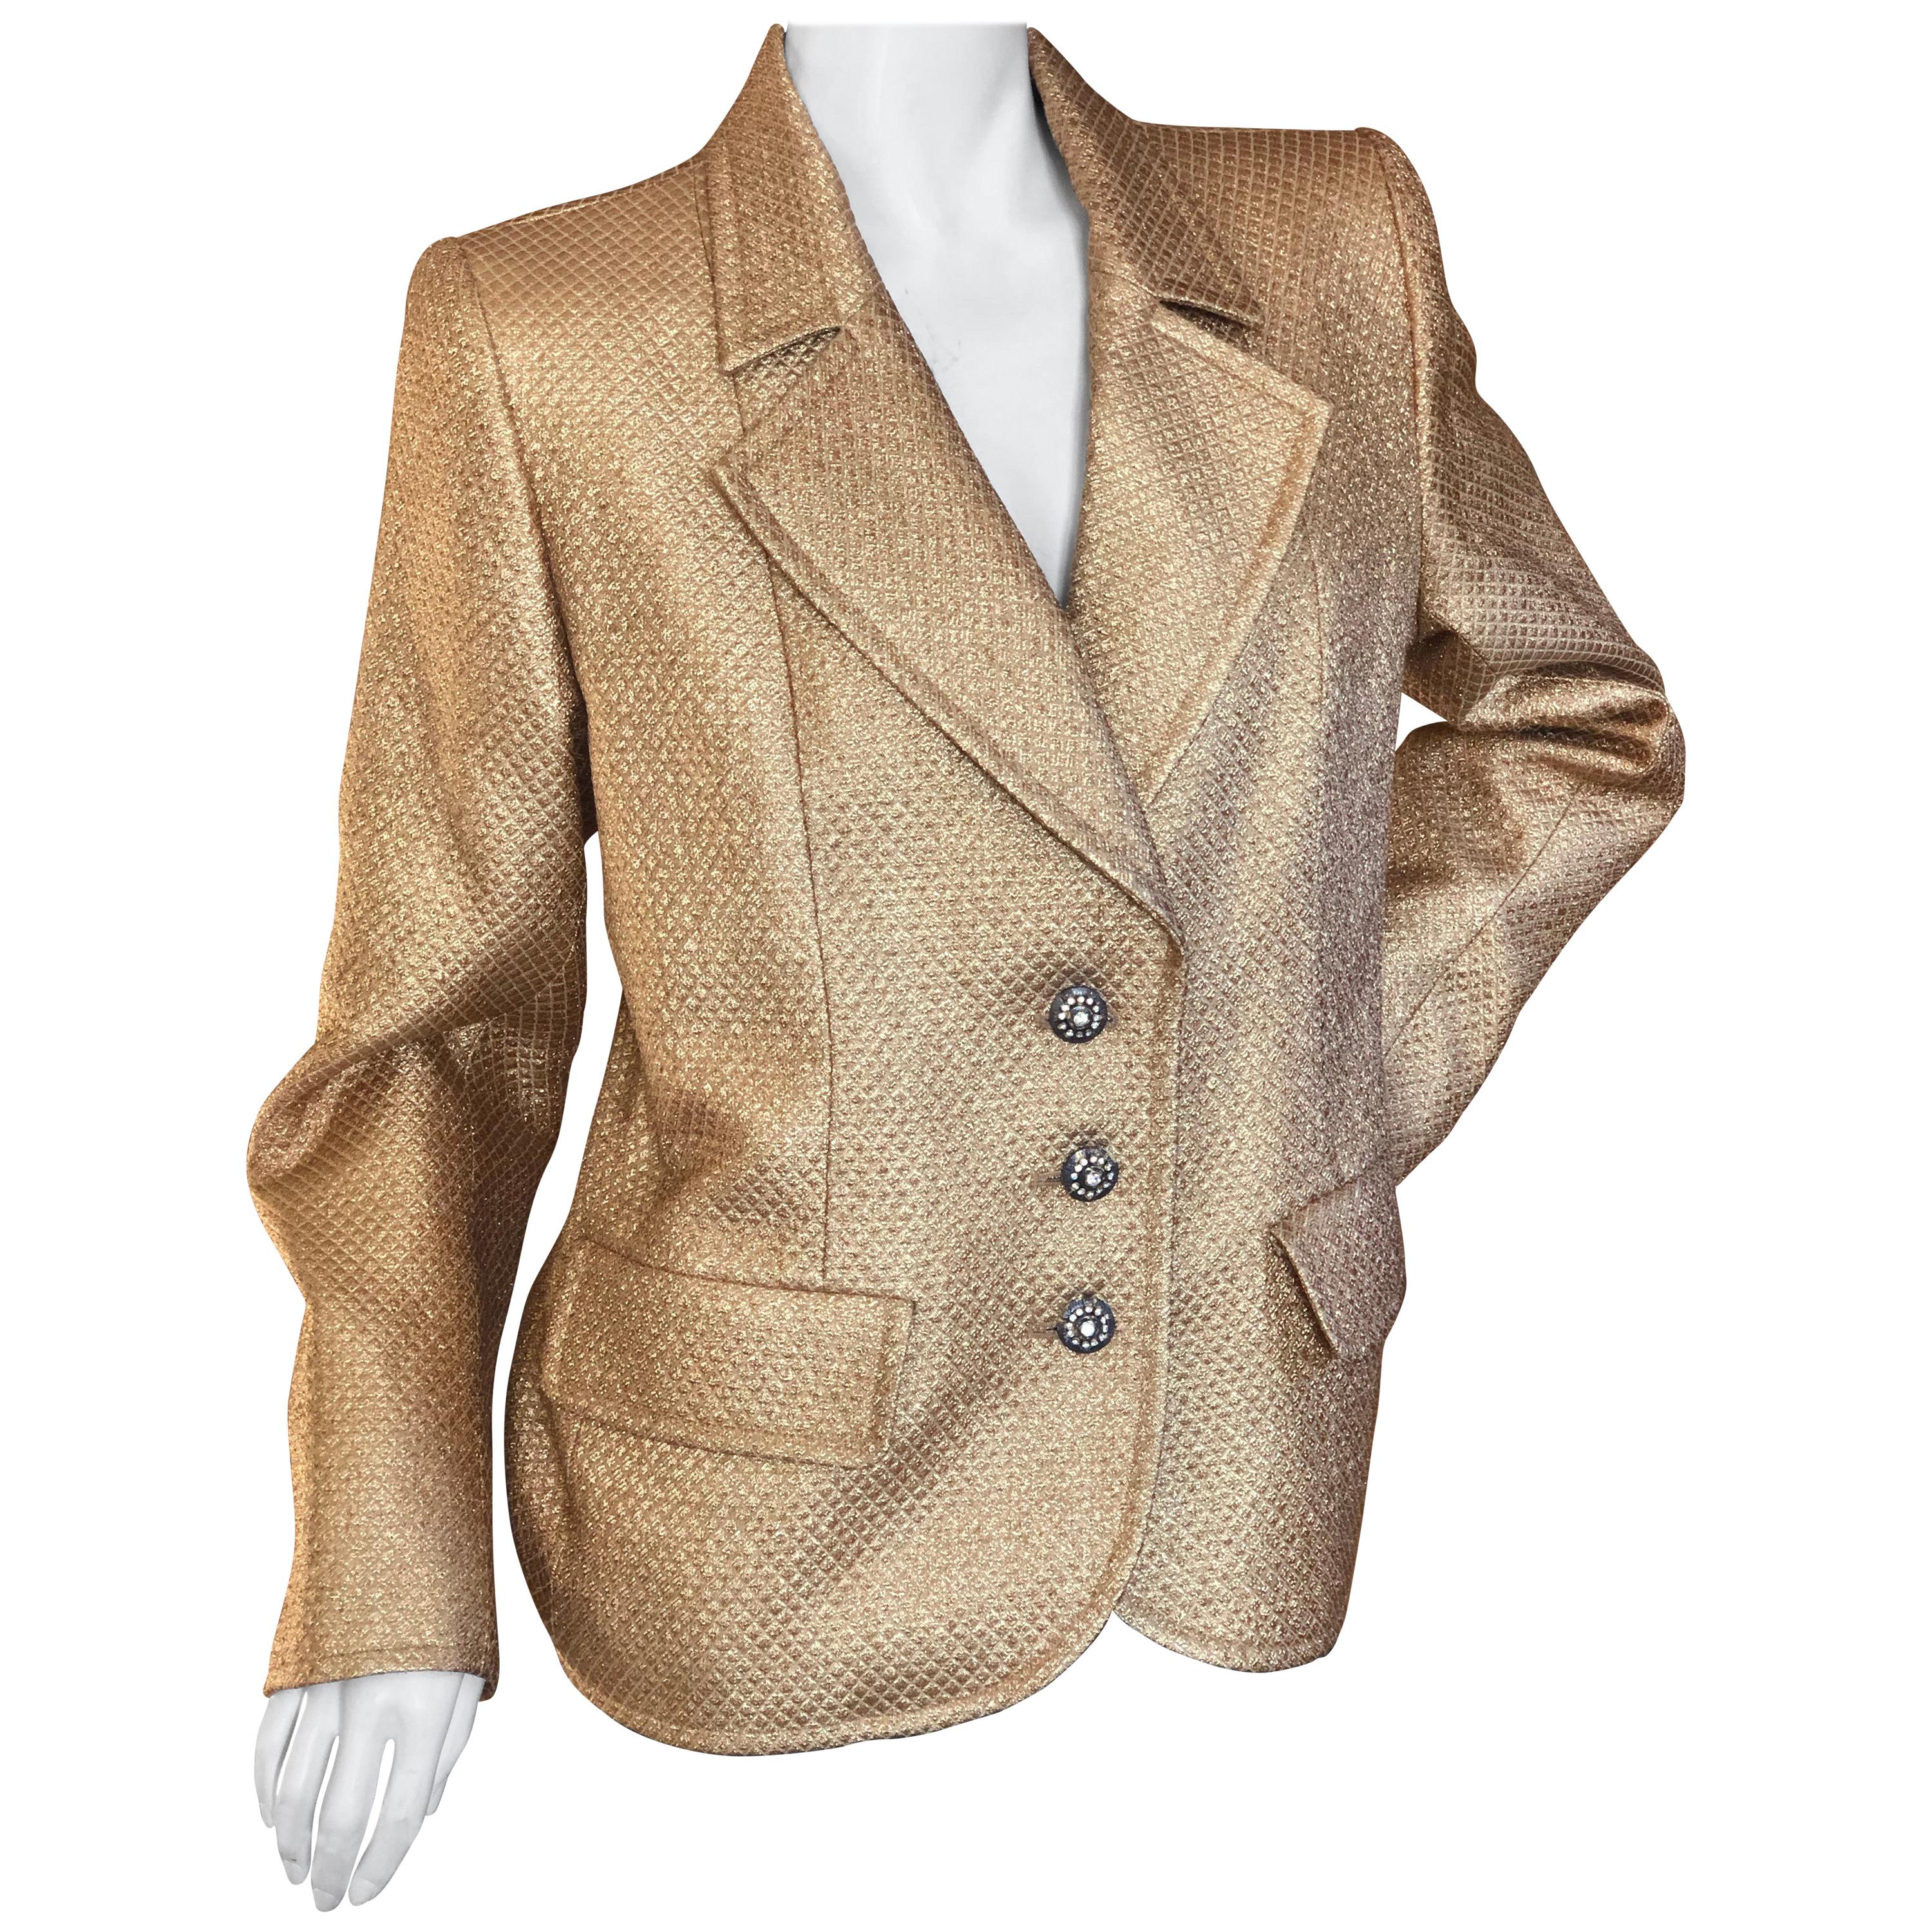 Yves Saint Laurent 1980's Gold Jacquard Jacket with Crystal Buttons For Sale